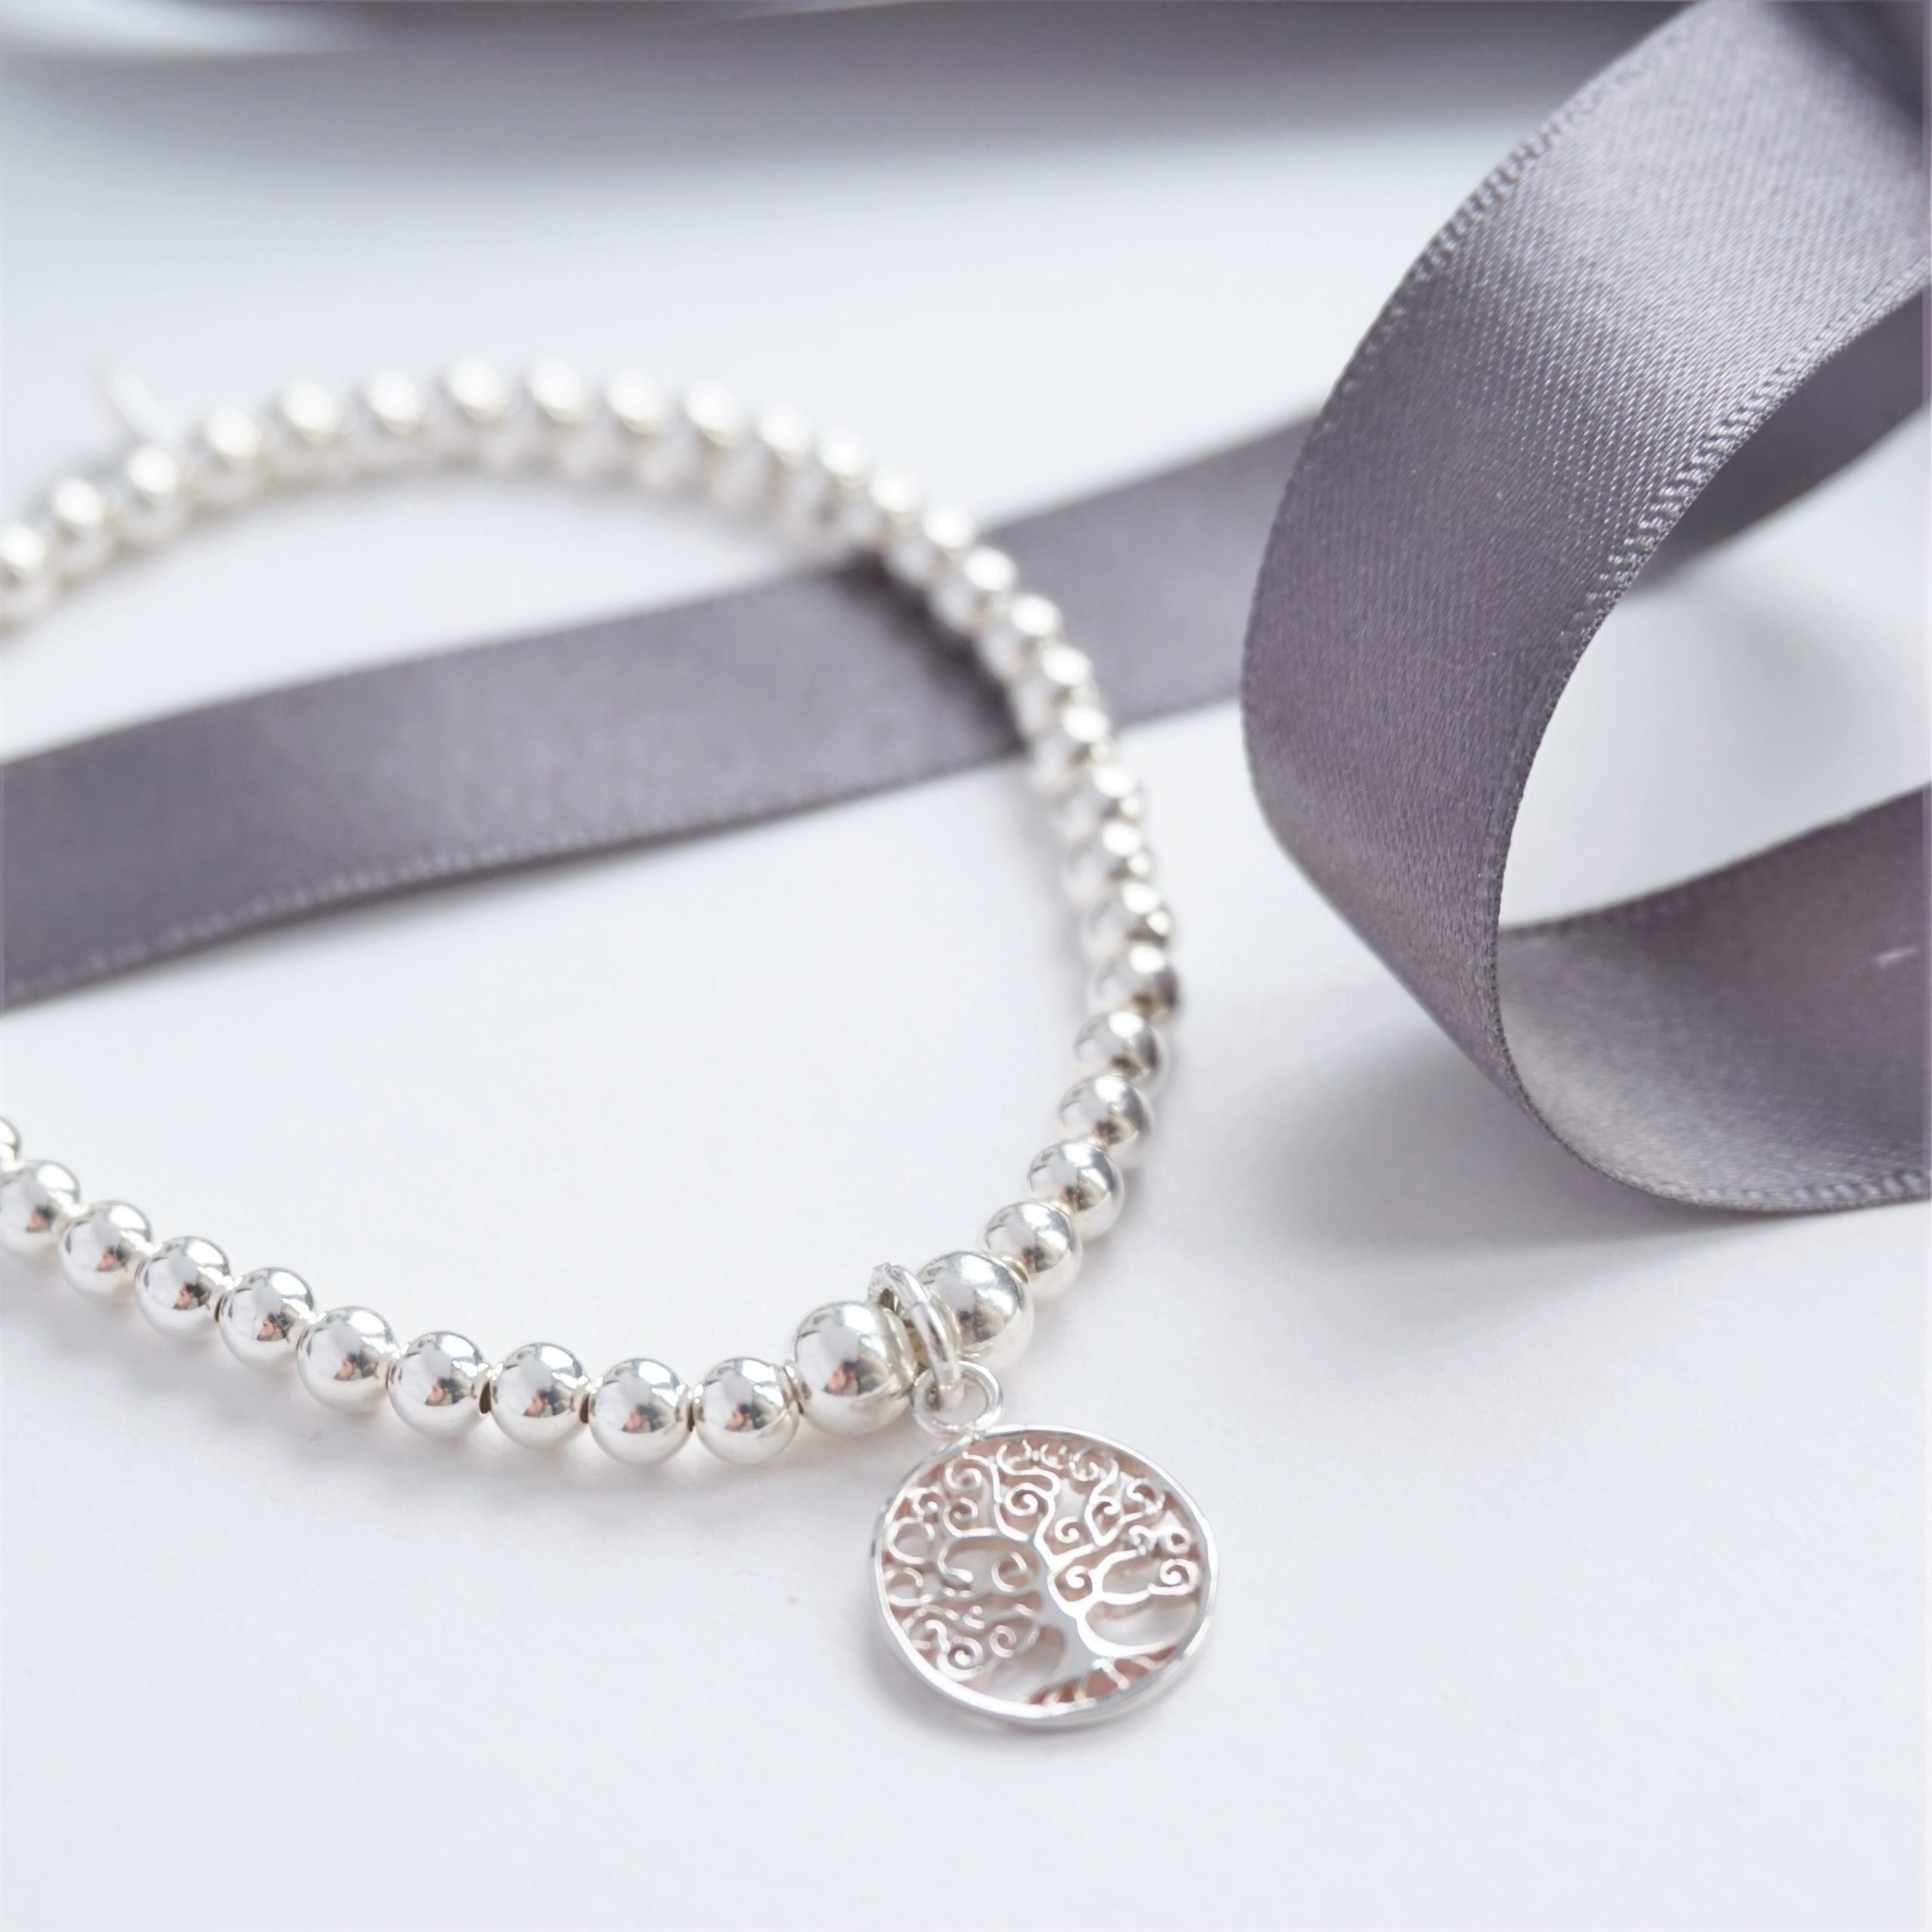 sterling silver bracelet with tree of life charm